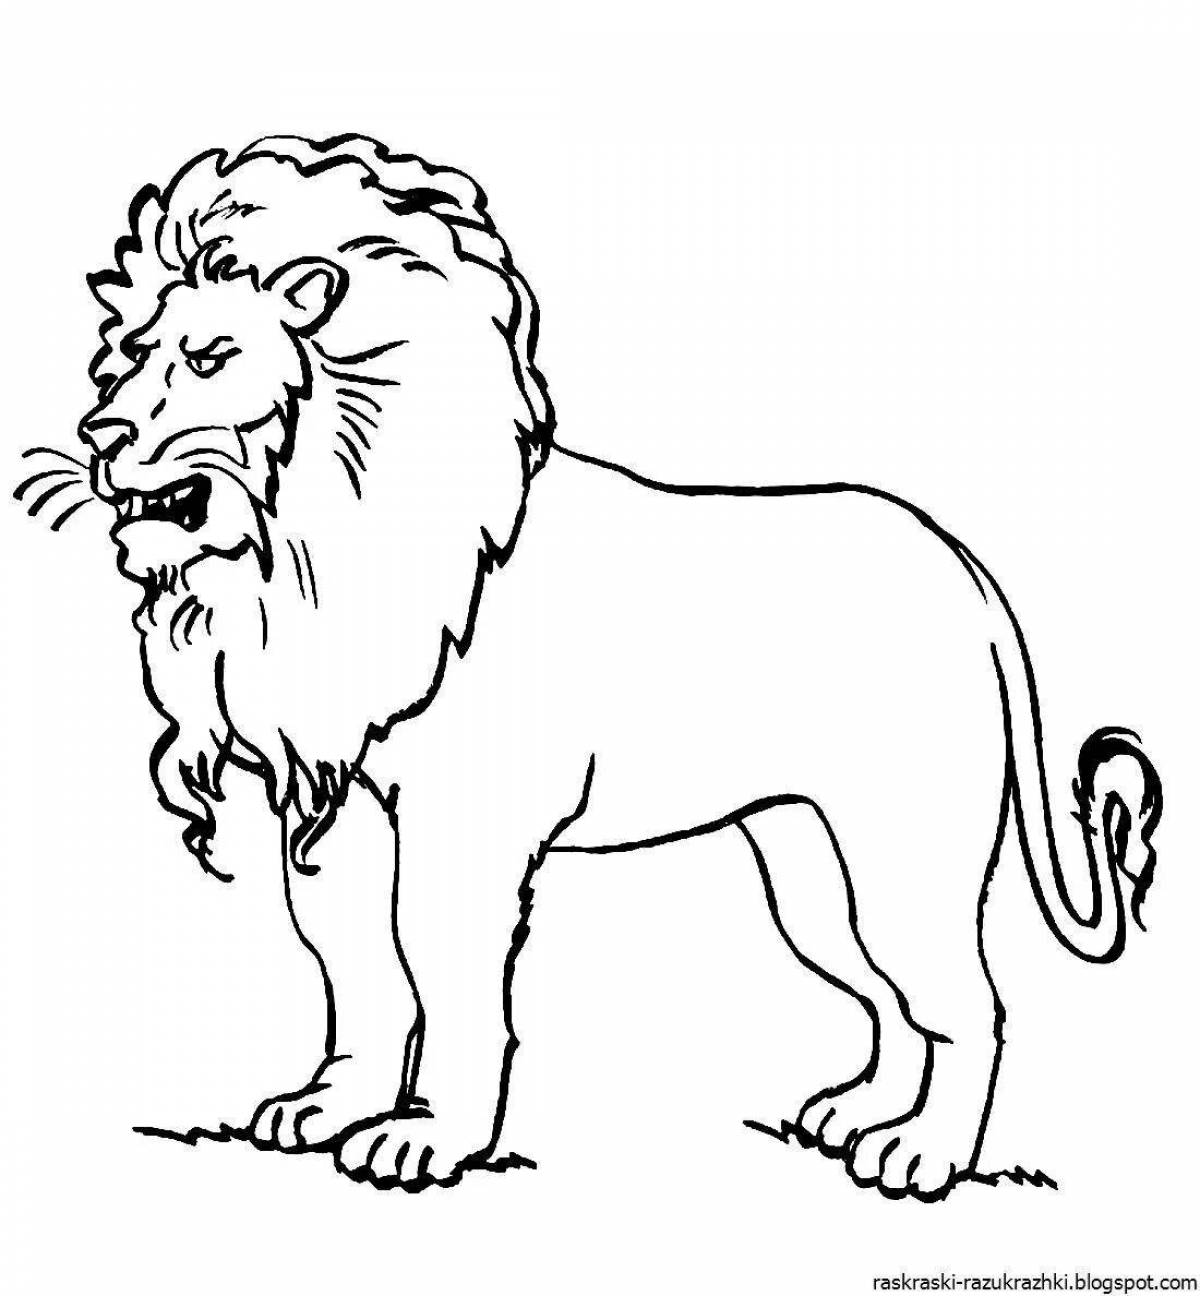 Coloring book noble lion for children